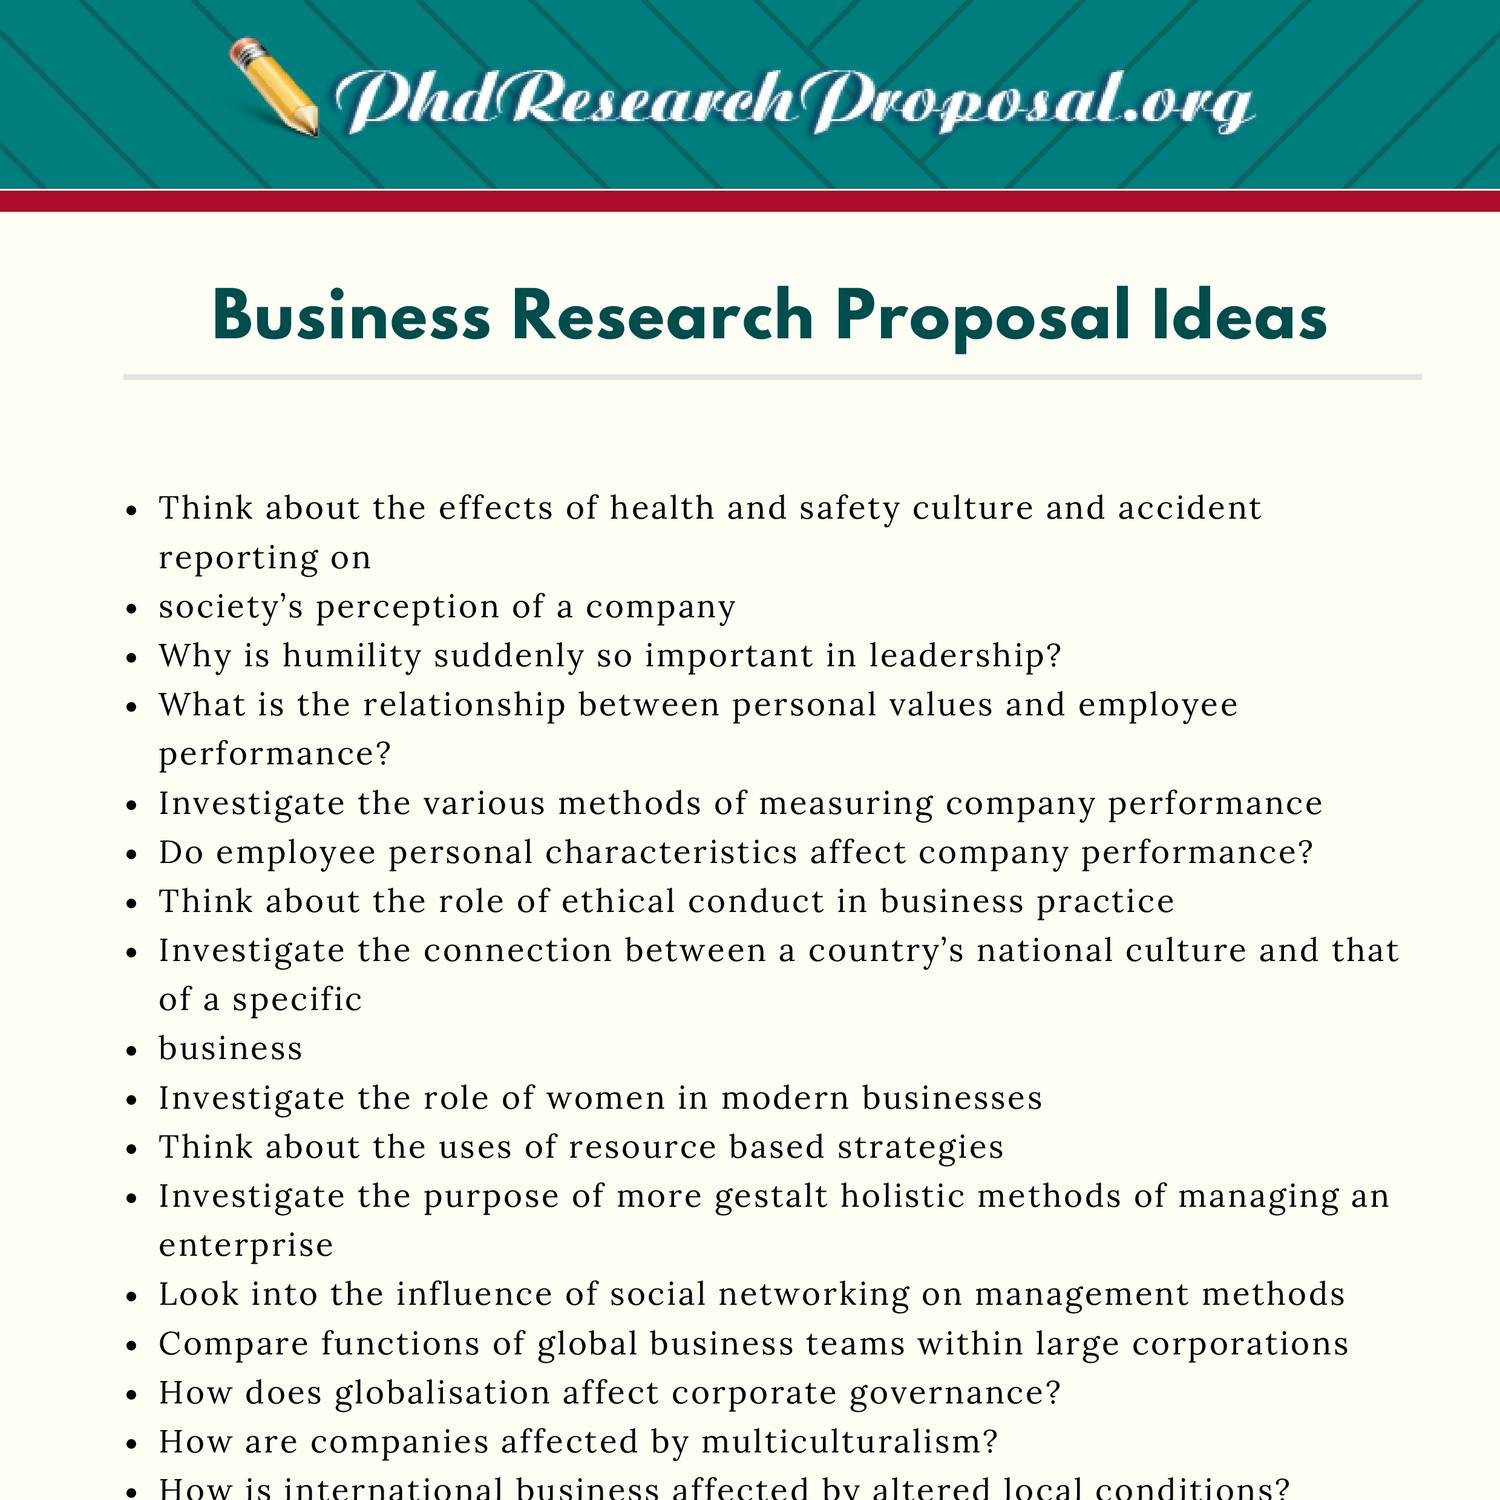 content of business research proposal